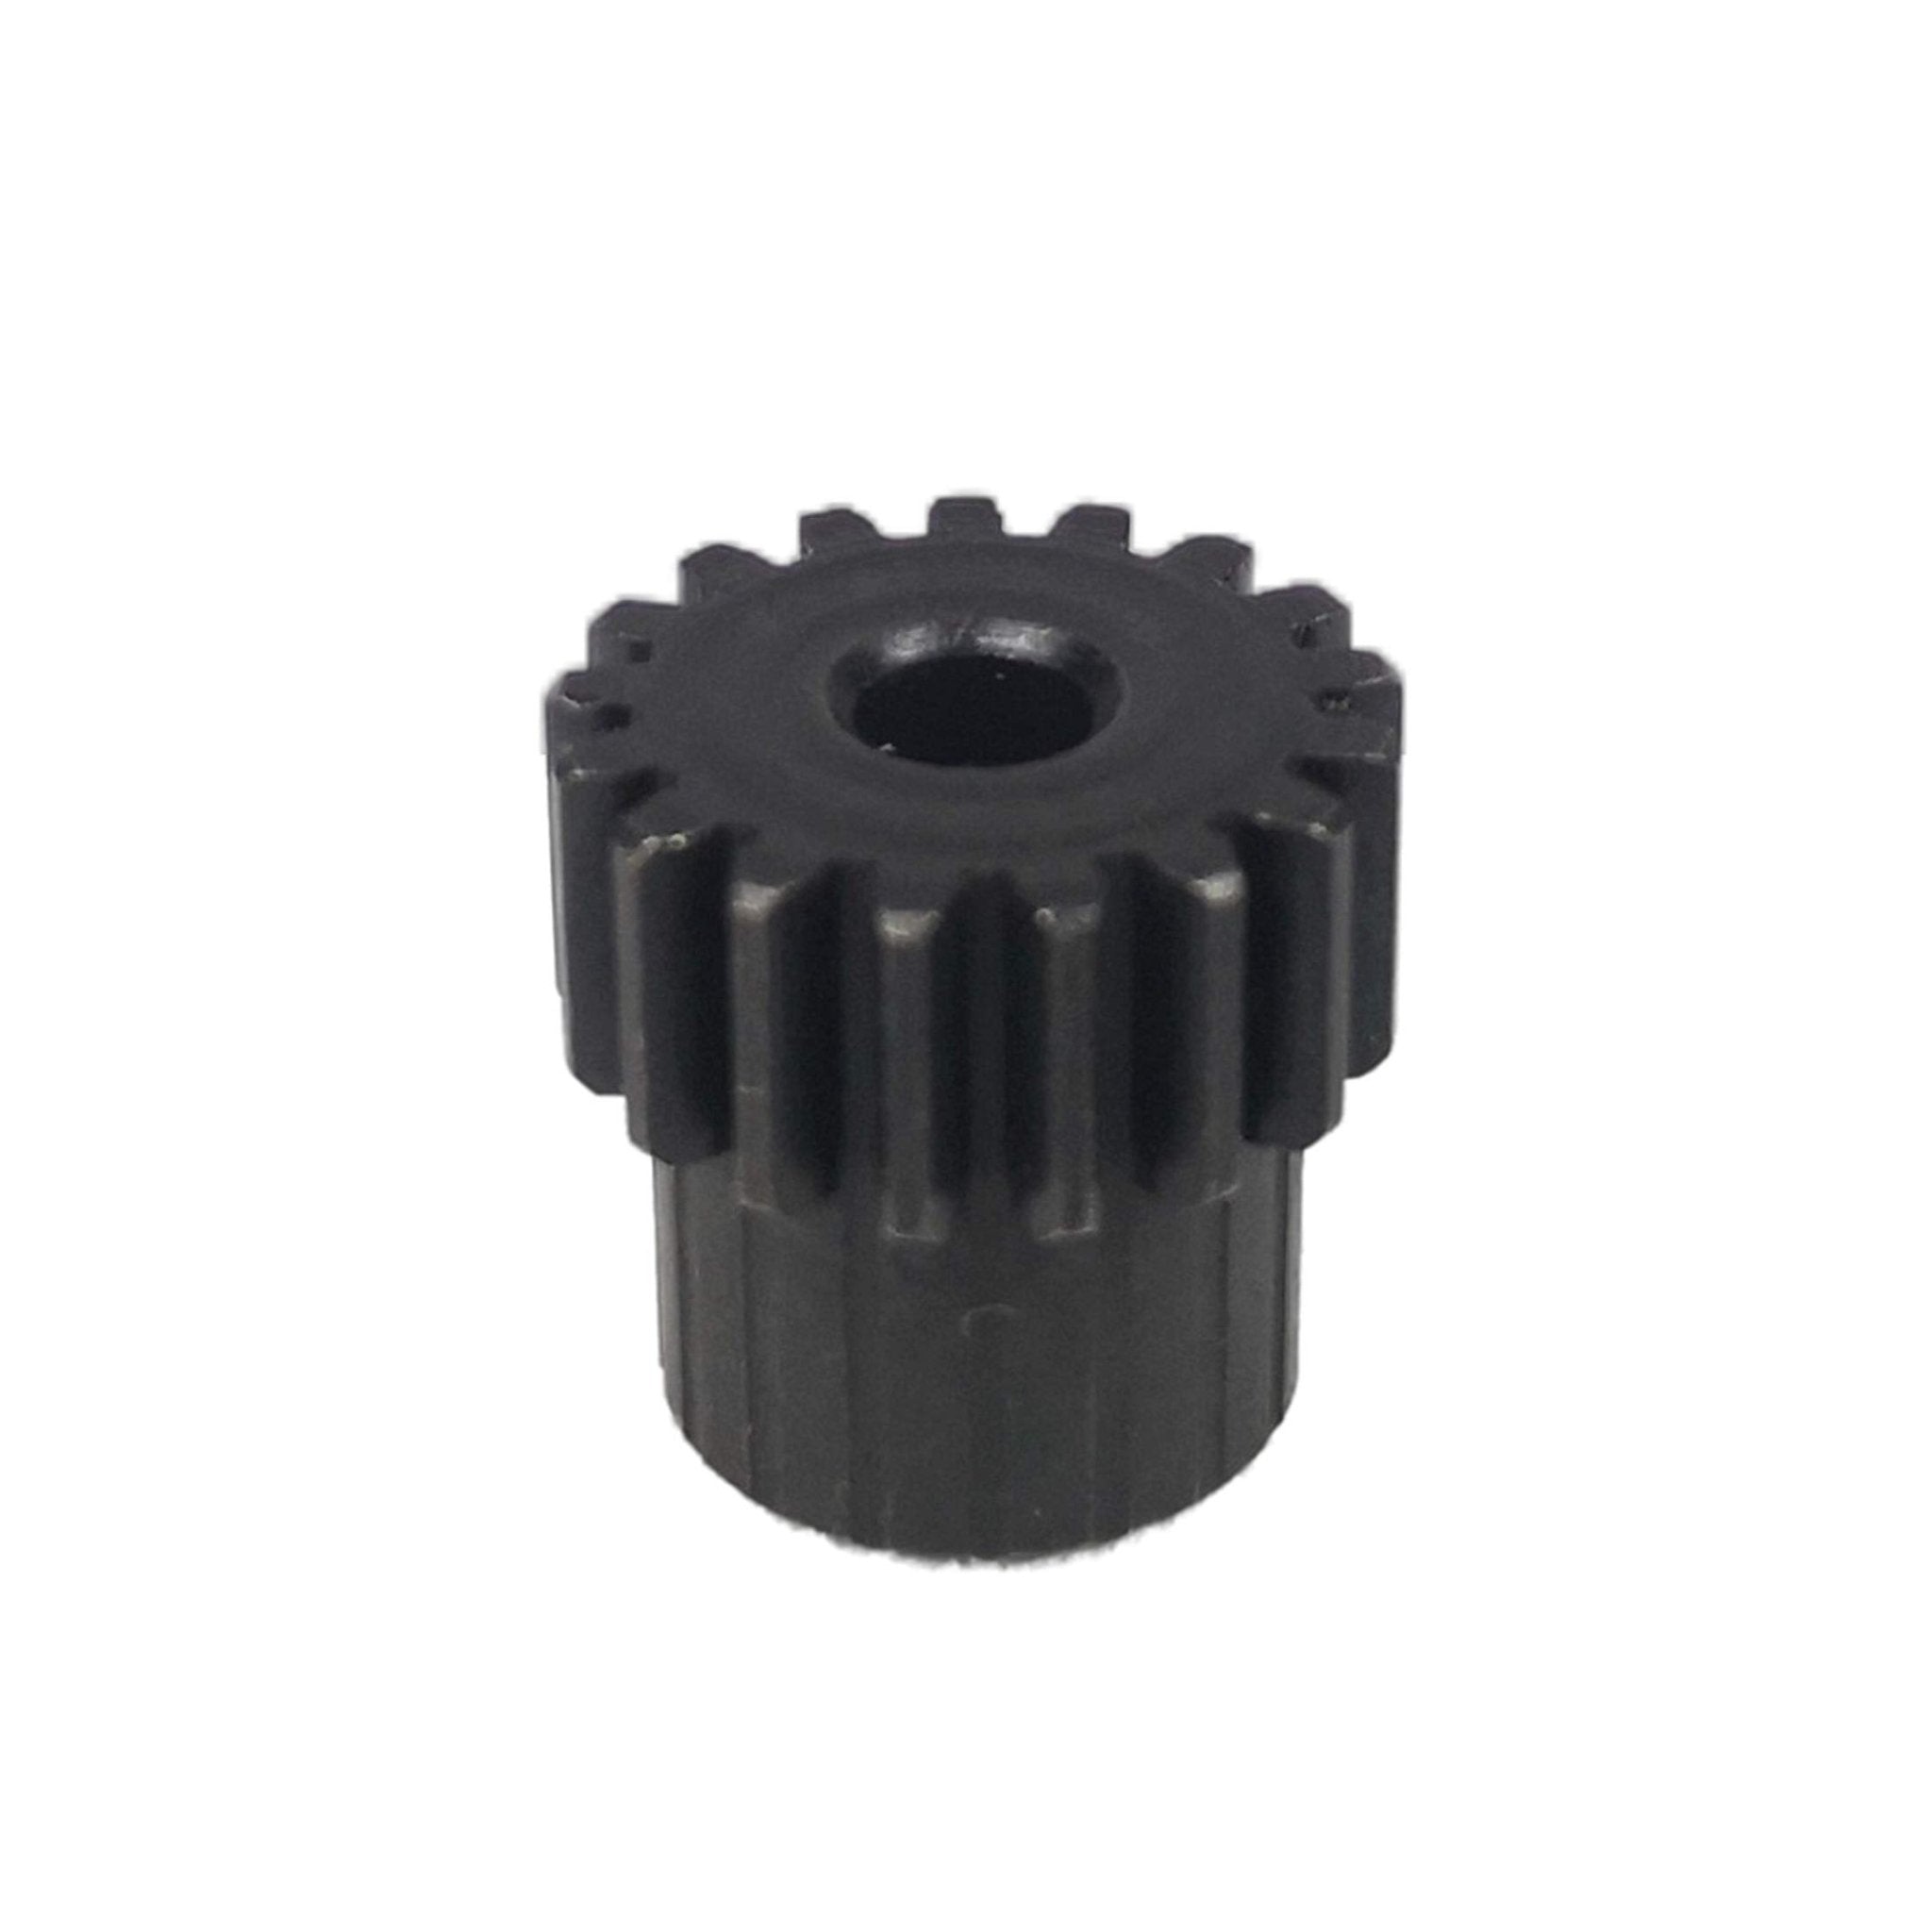 Pinion Gear - 17T - Part Number - TH-3002